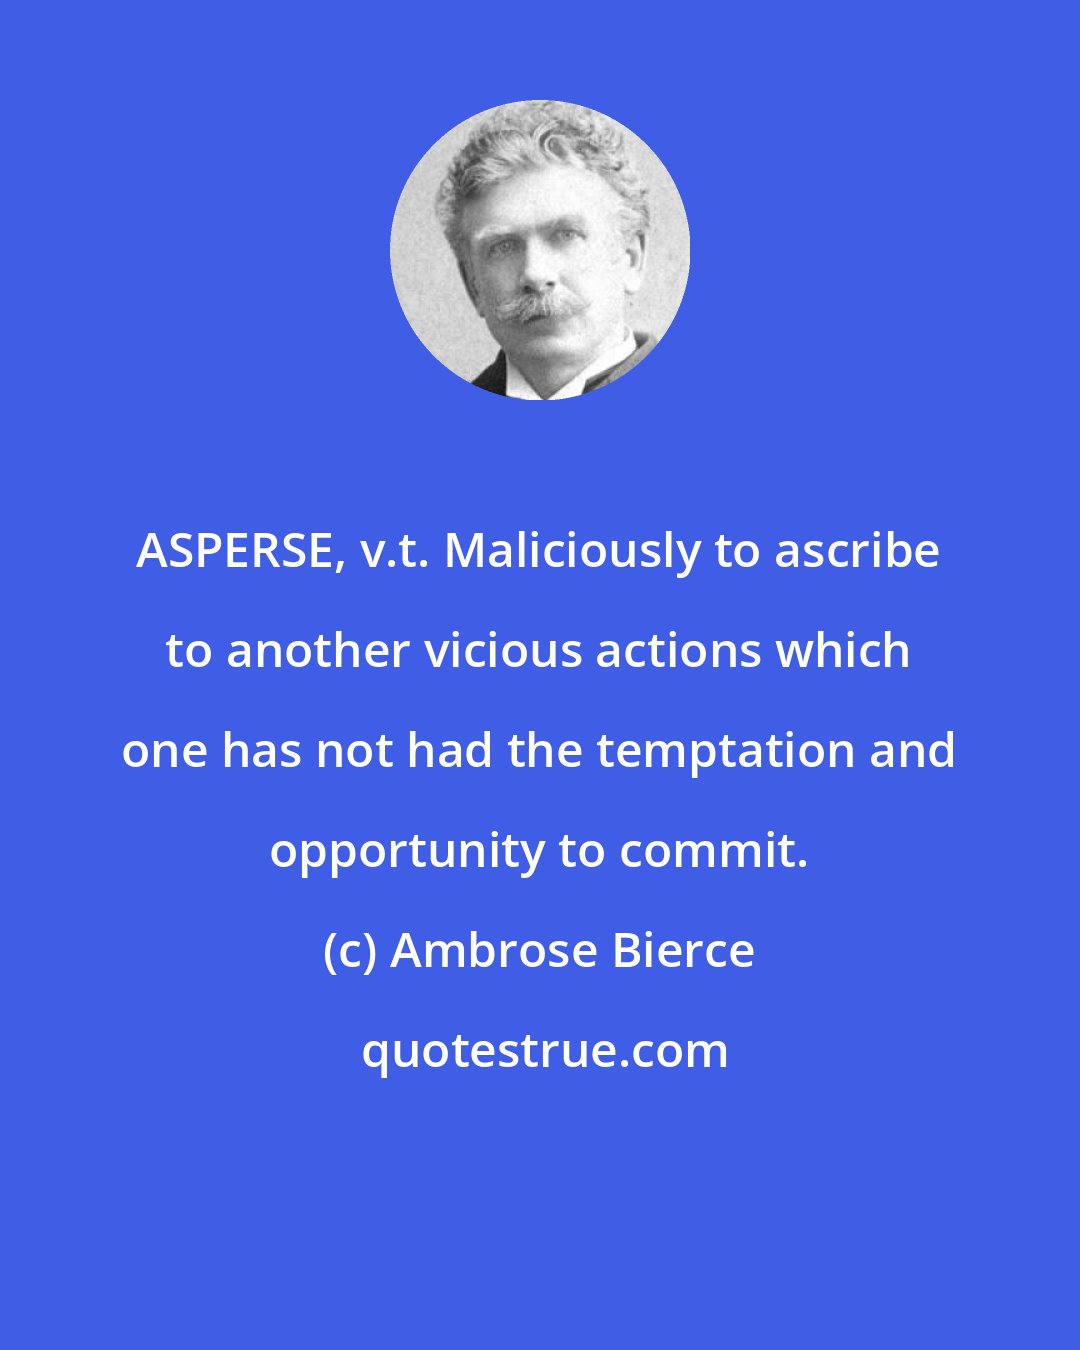 Ambrose Bierce: ASPERSE, v.t. Maliciously to ascribe to another vicious actions which one has not had the temptation and opportunity to commit.